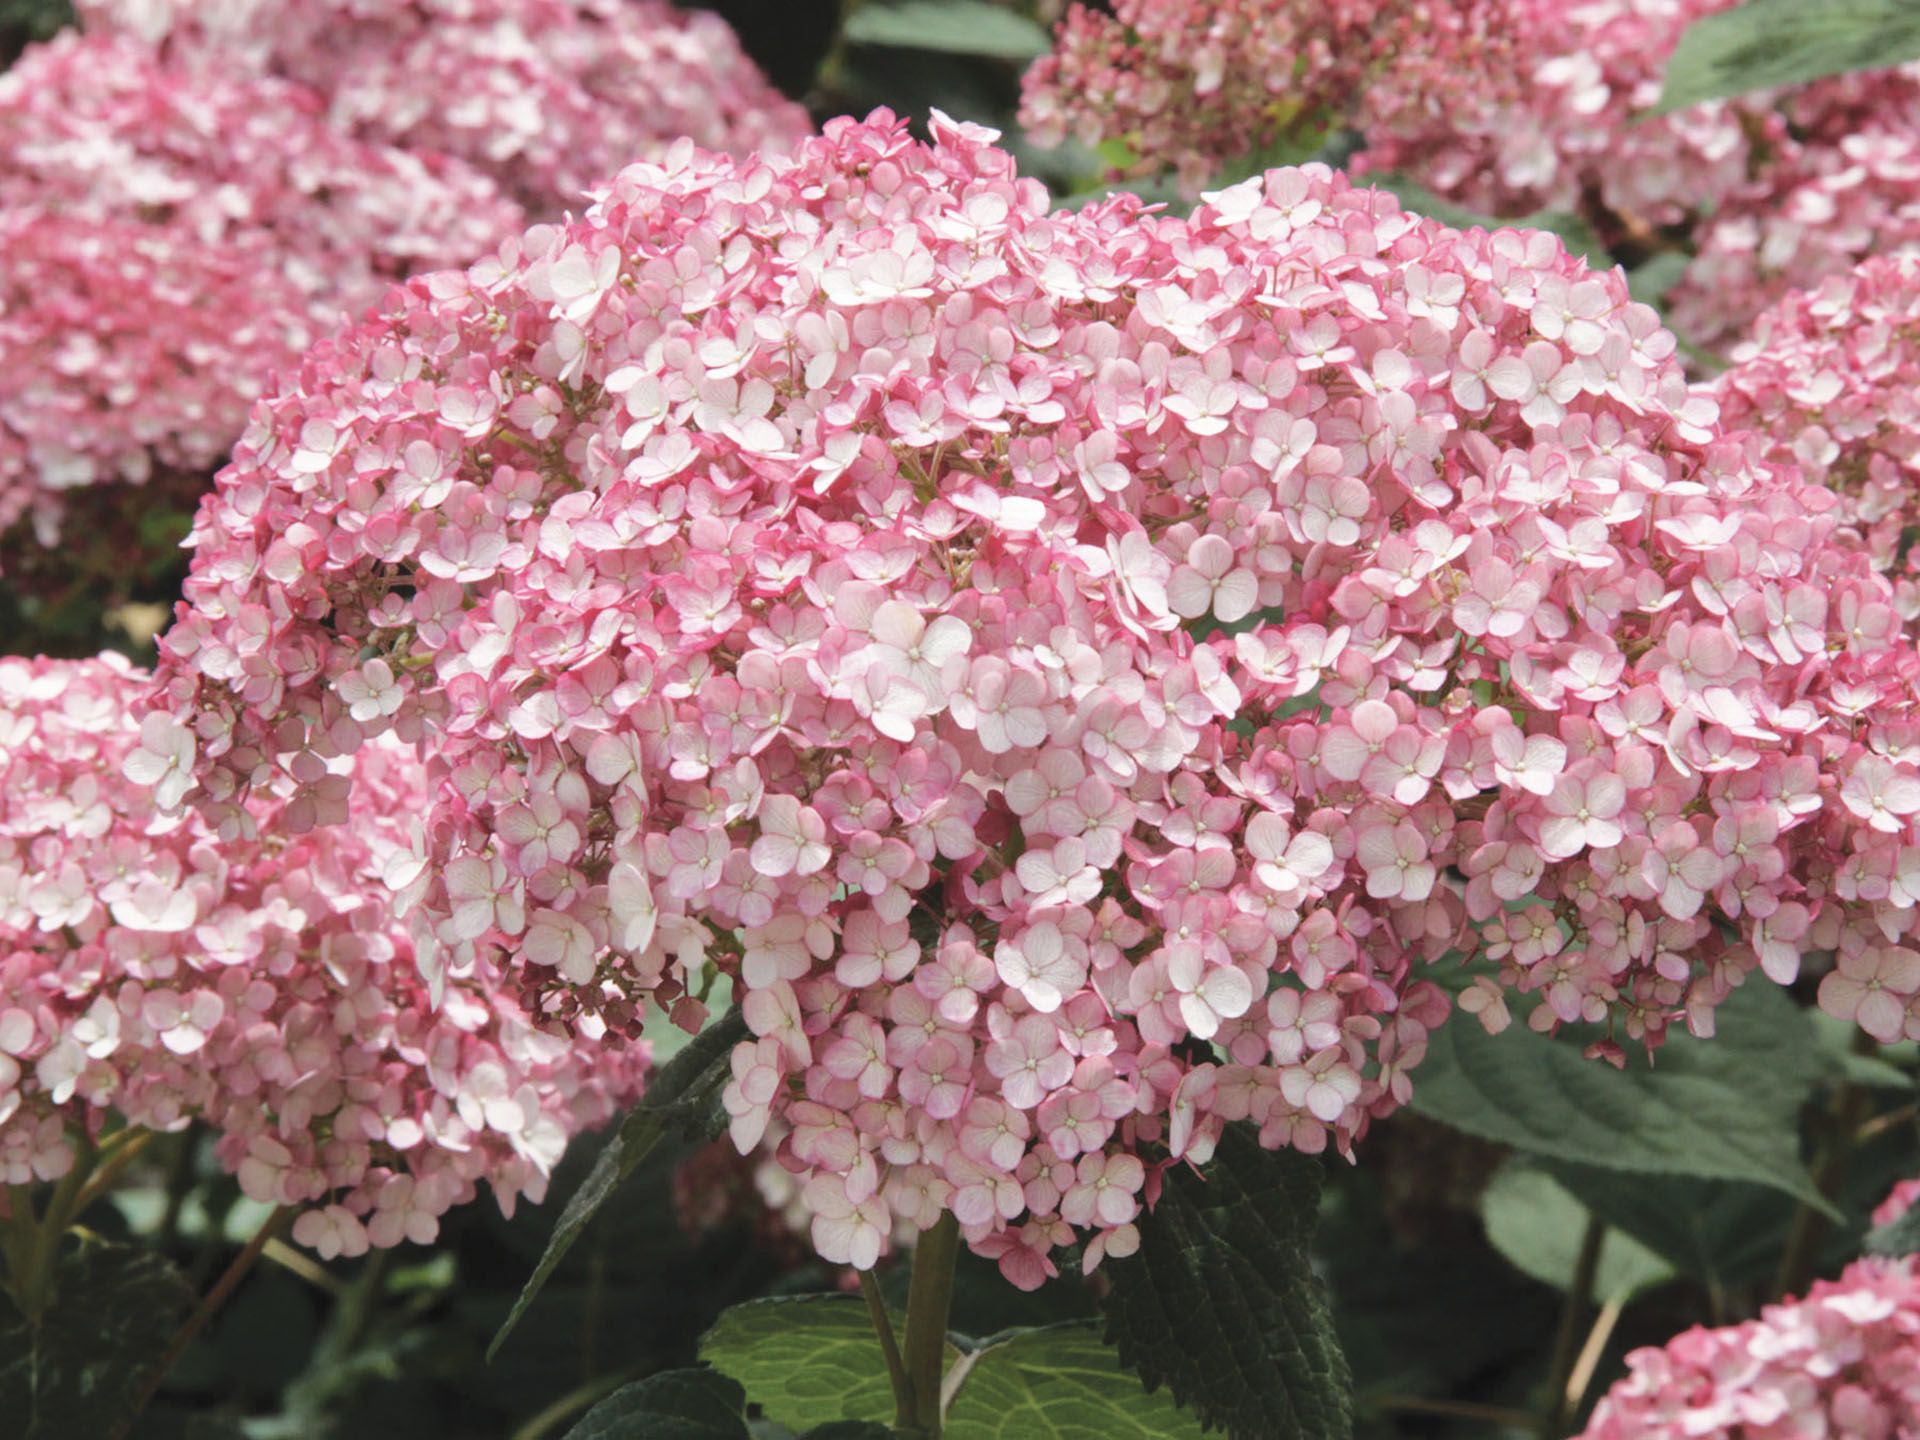 Image of Hydrangea sweet annabelle with pink flowers